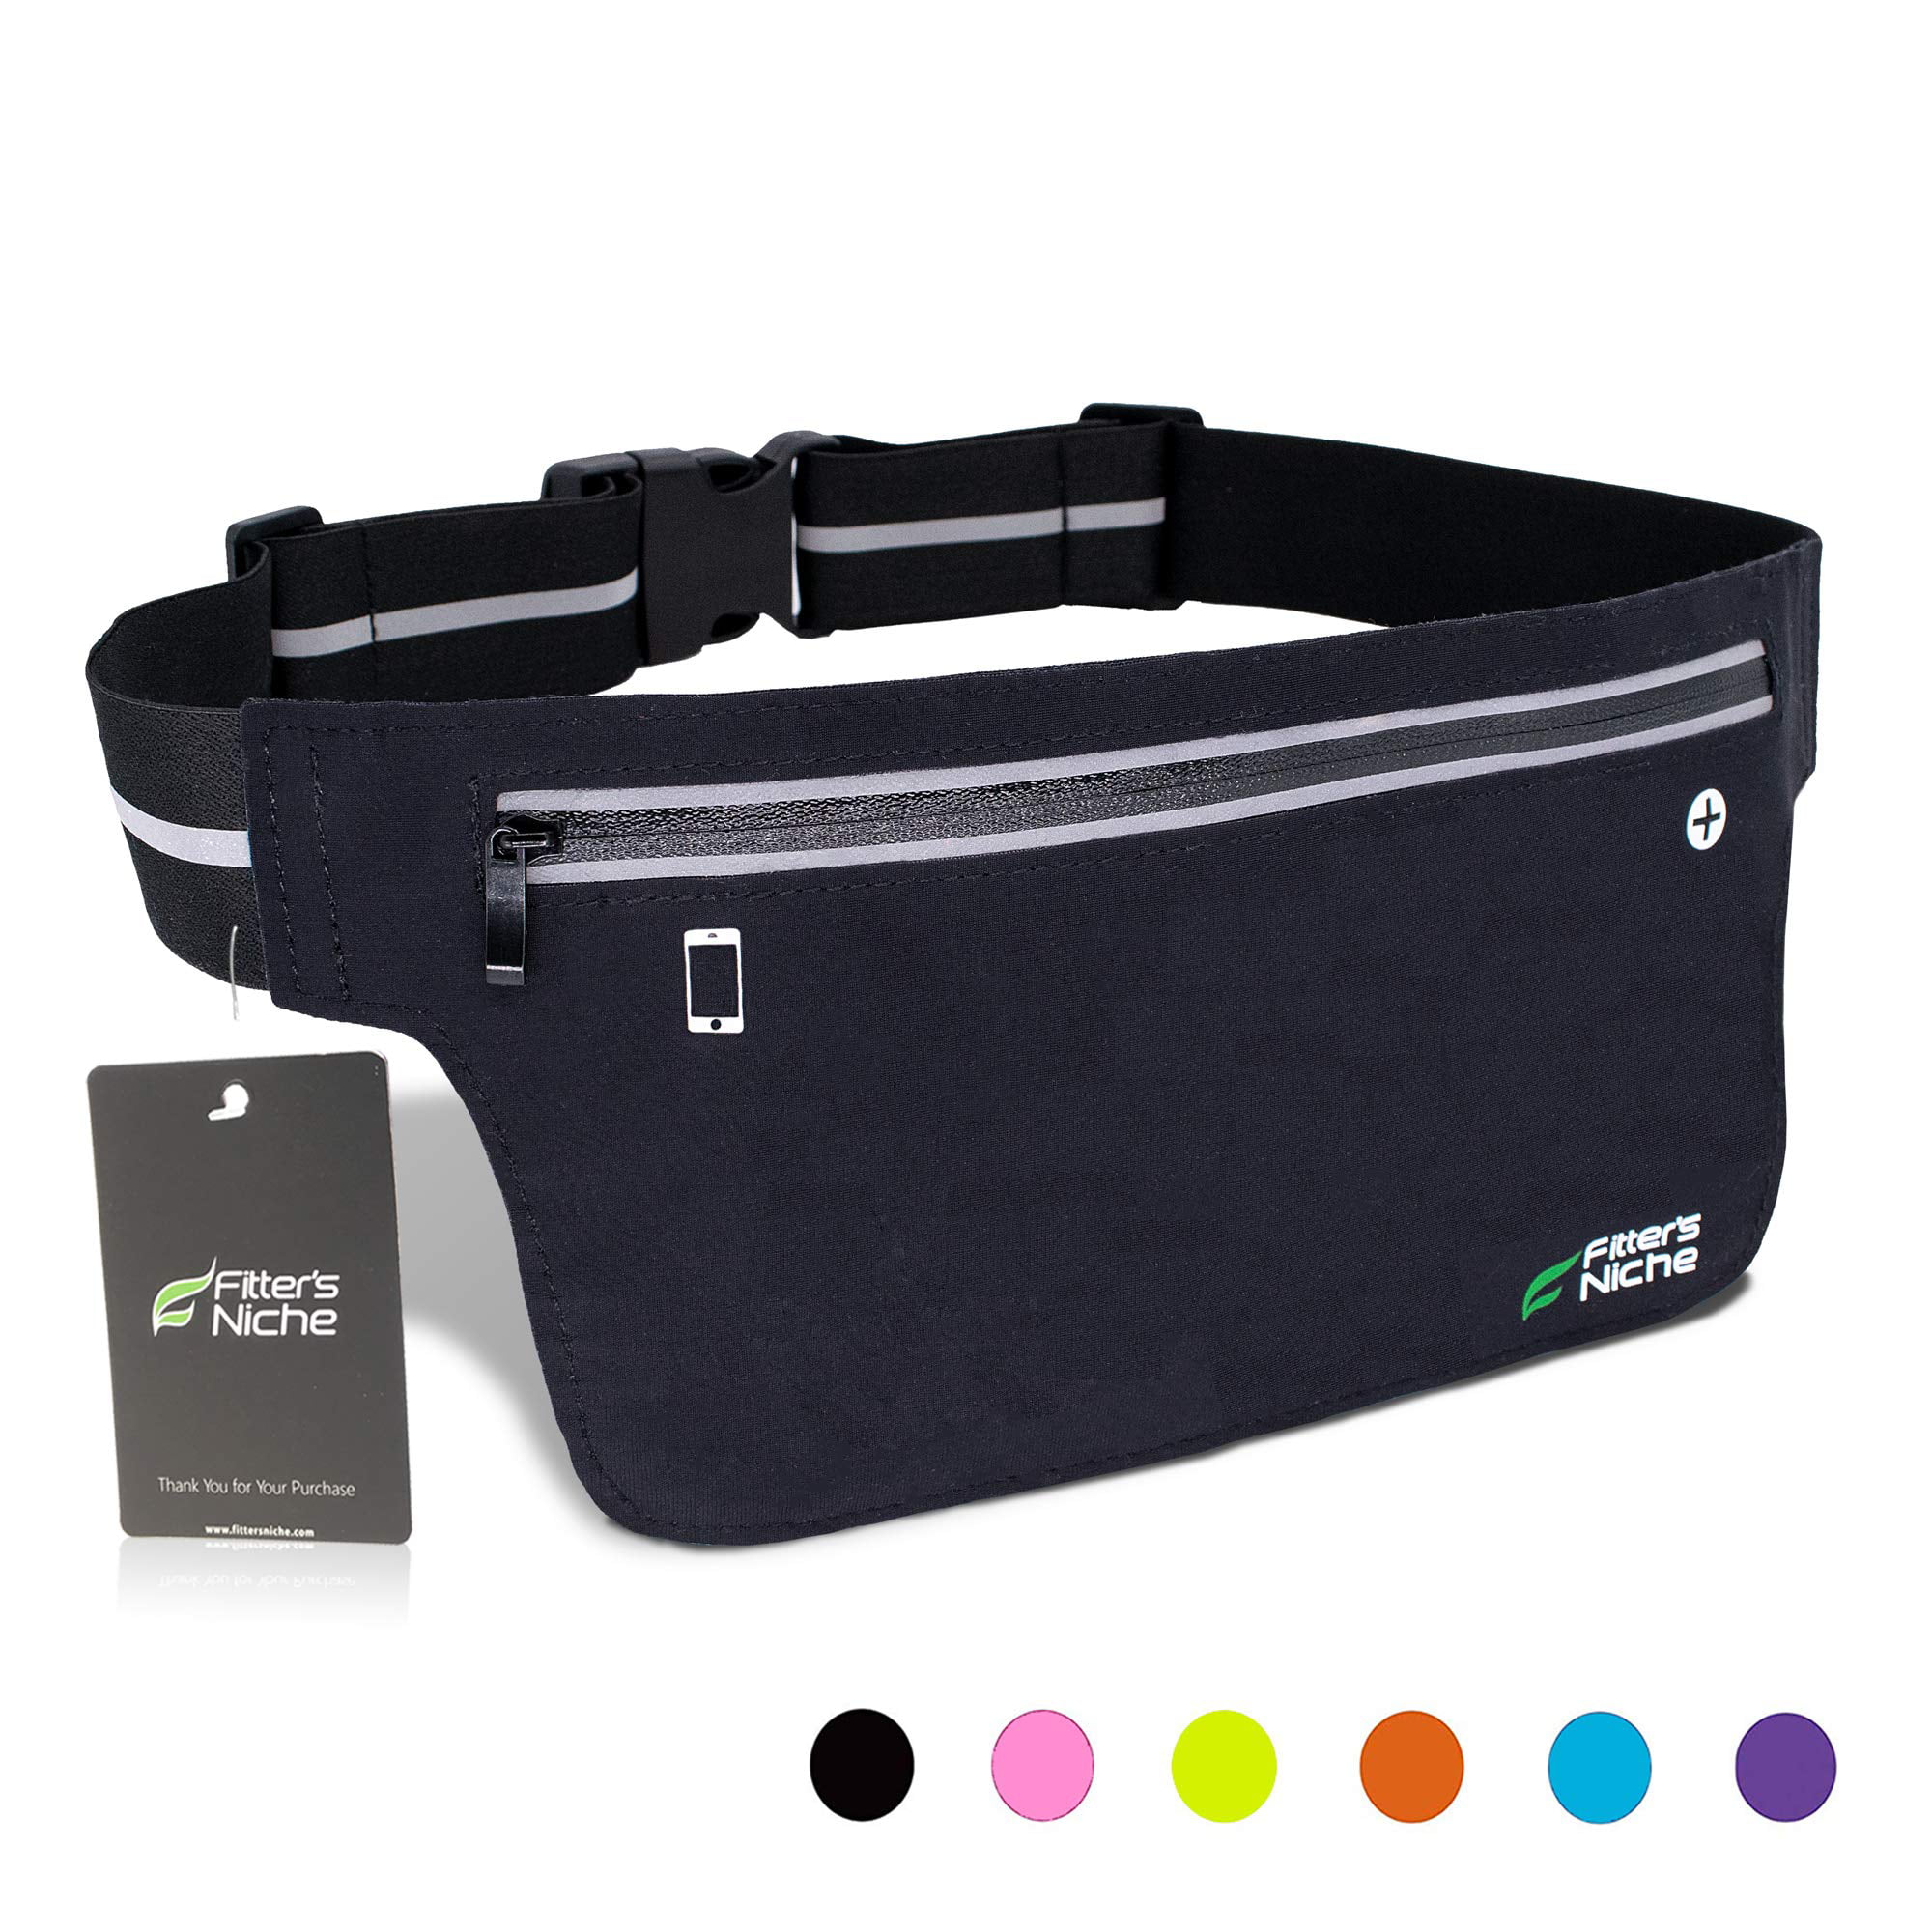 fitters niche Ultra Slim Fanny Waist Pack Running Belt Water Resistant Lightweight Bounce Free Fitness Workout Exercise Pouch Bag for iPhone Xs 8 Samsung Note in Biking Walking Hiking Gym Sports 